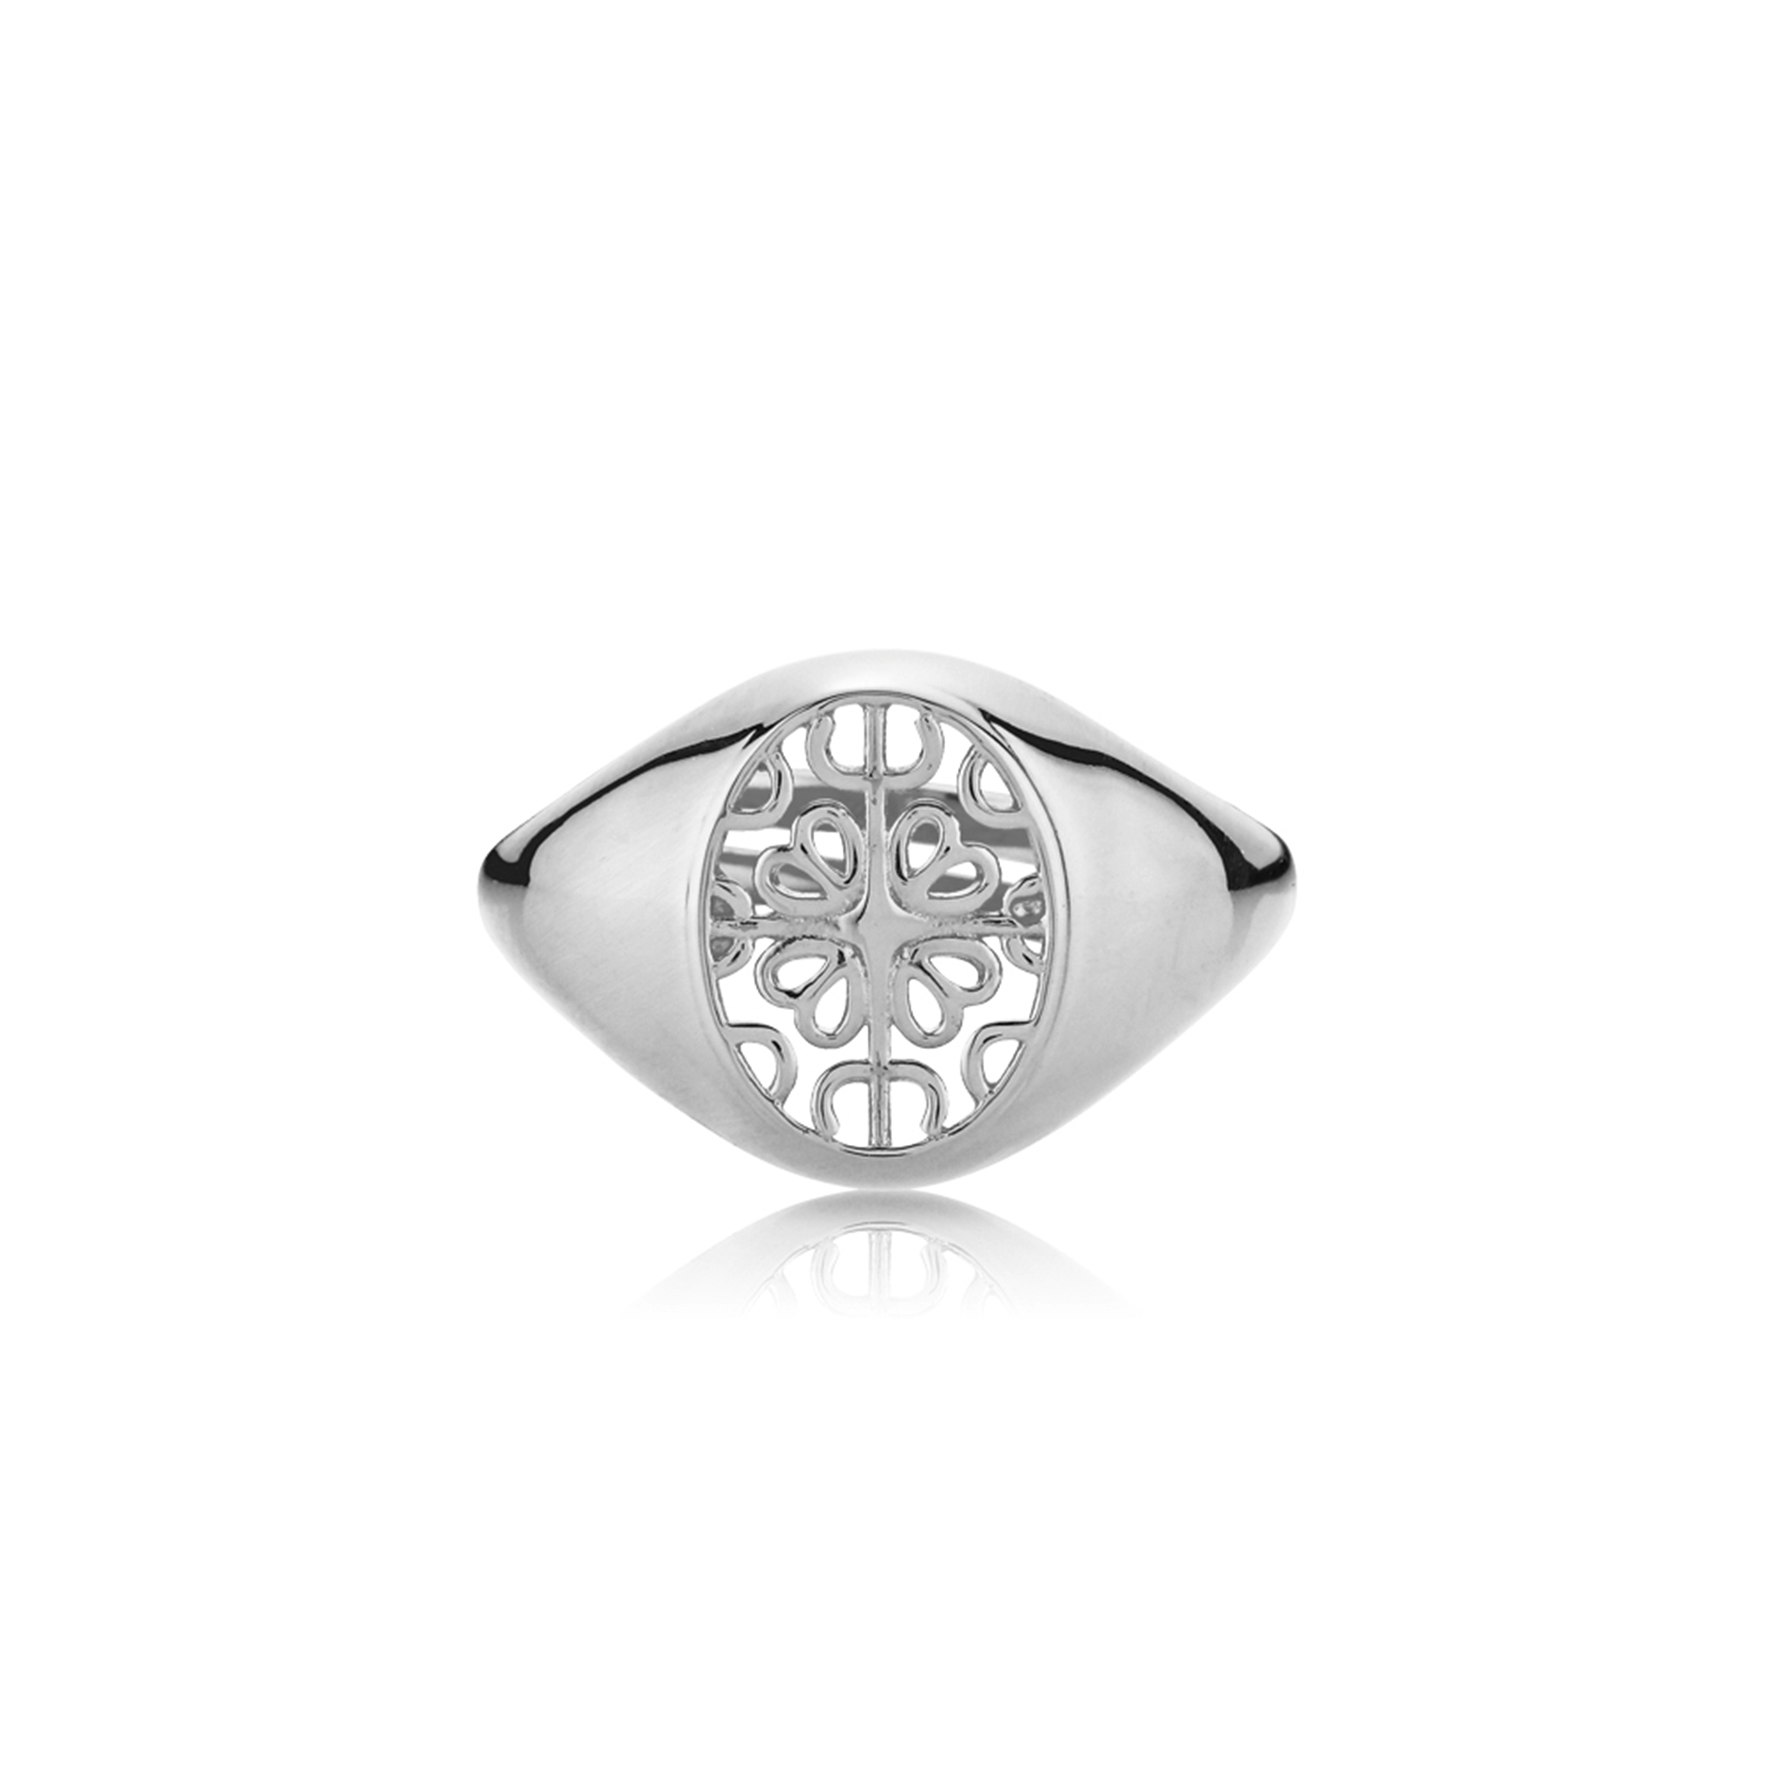 Balance Round Ring from Sistie in Silver Sterling 925